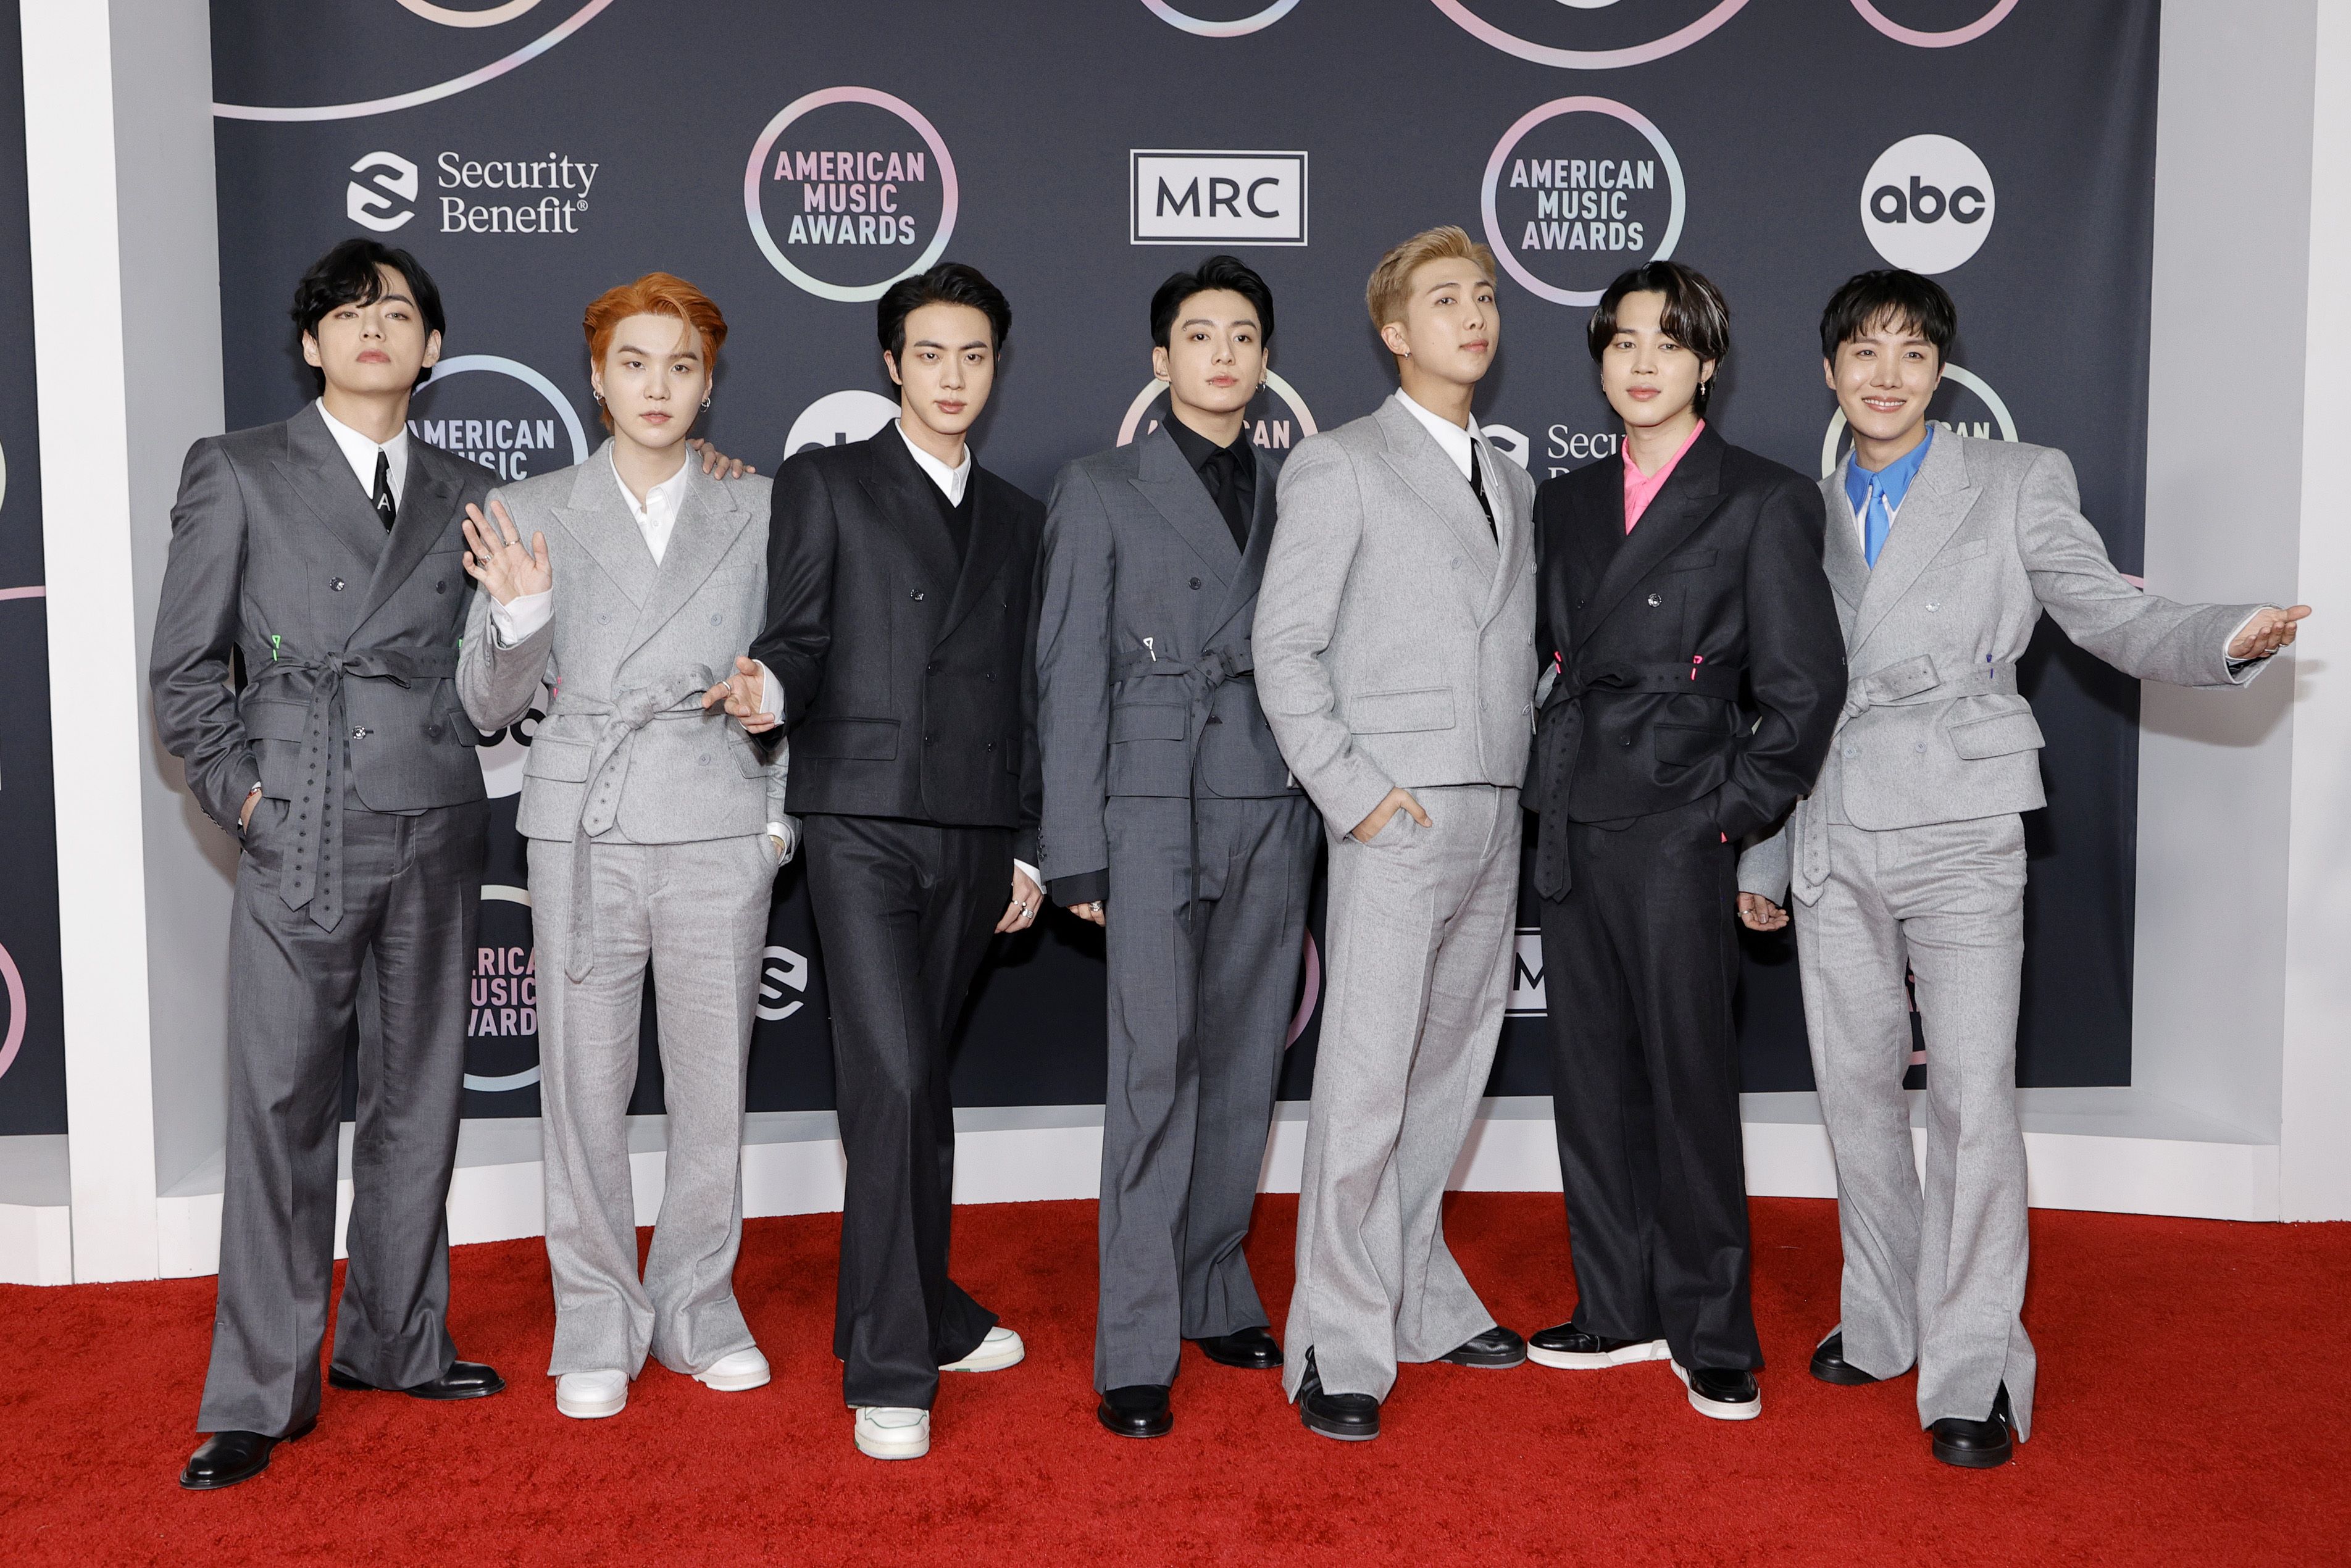 LOS ANGELES, CALIFORNIA - NOVEMBER 21: (L-R) V, Suga, Jin, Jungkook, RM, Jimin, and J-Hope of BTS attend the 2021 American Music Awards at Microsoft Theater on November 21, 2021 in Los Angeles, California.   Amy Sussman/Getty Images/AFP
== FOR NEWSPAPERS, INTERNET, TELCOS & TELEVISION USE ONLY ==